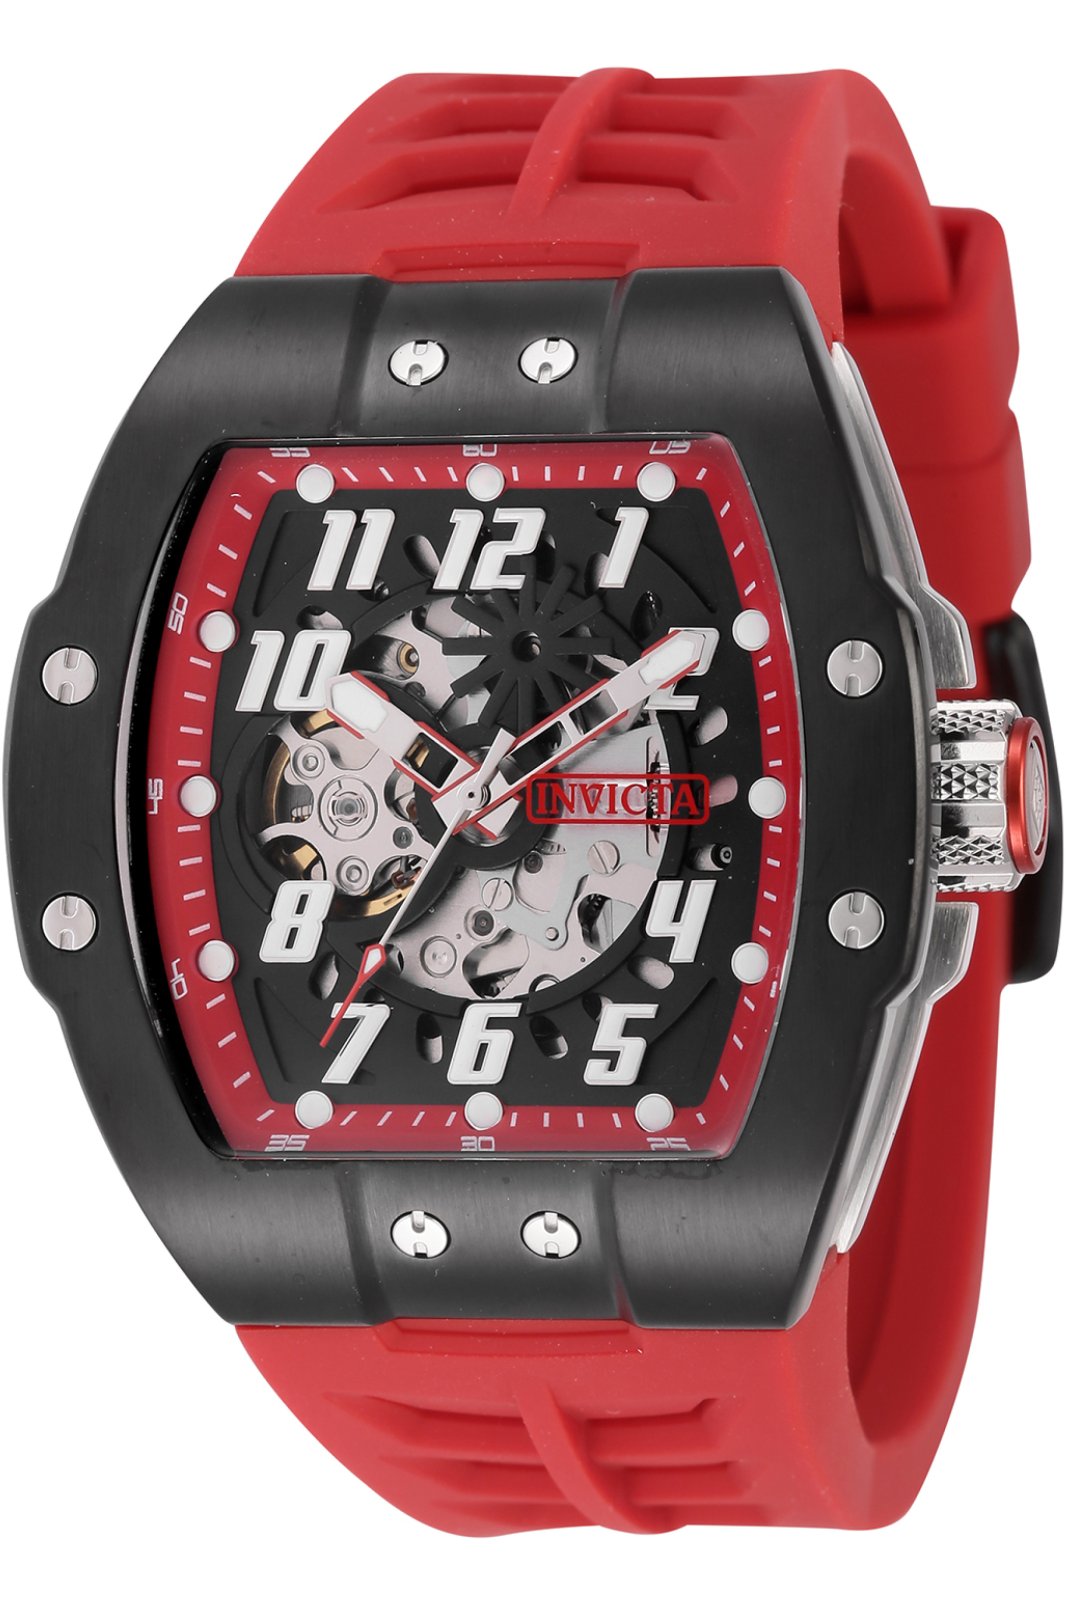 Invicta S1 Rally 44891 Men's Automatic Watch - 44mm